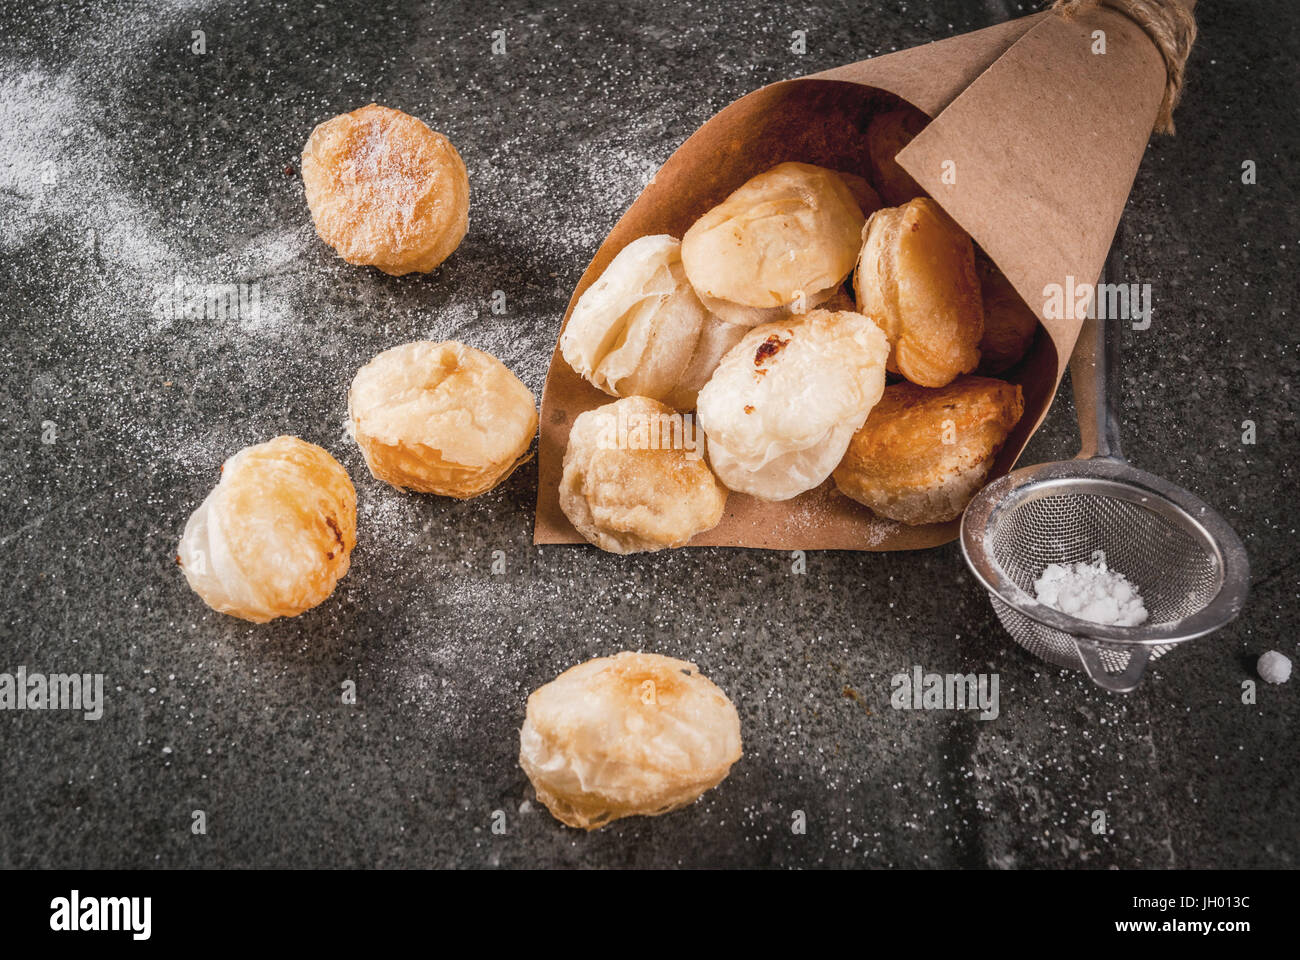 Homemade baking, puff pastries. Trendy food. Cronuts popcorn, puff donuts holes, in paper bag, with powdered sugar. On a dark stone table. Copy space Stock Photo